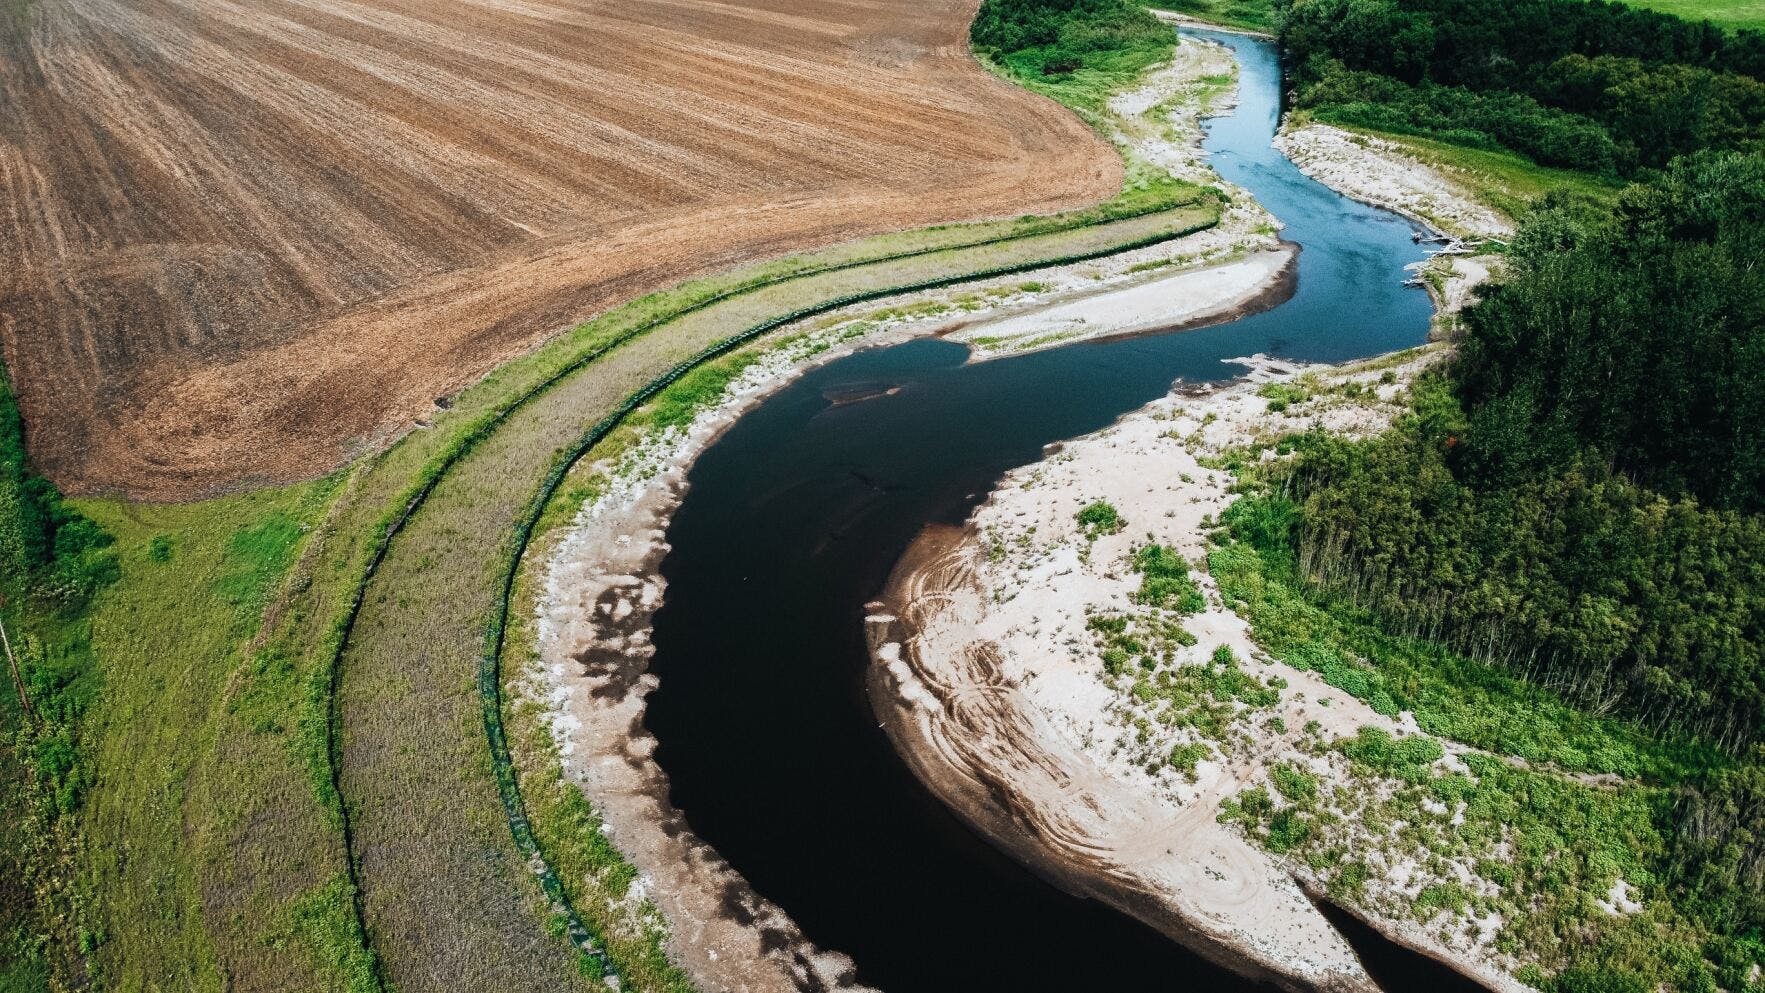 The west fork of the Des Moines River in Palo Alto County, had experienced years of erosion and flooding. From 2006 to 2019, the riverbank had receded up to 215 feet in the middle of the bend.